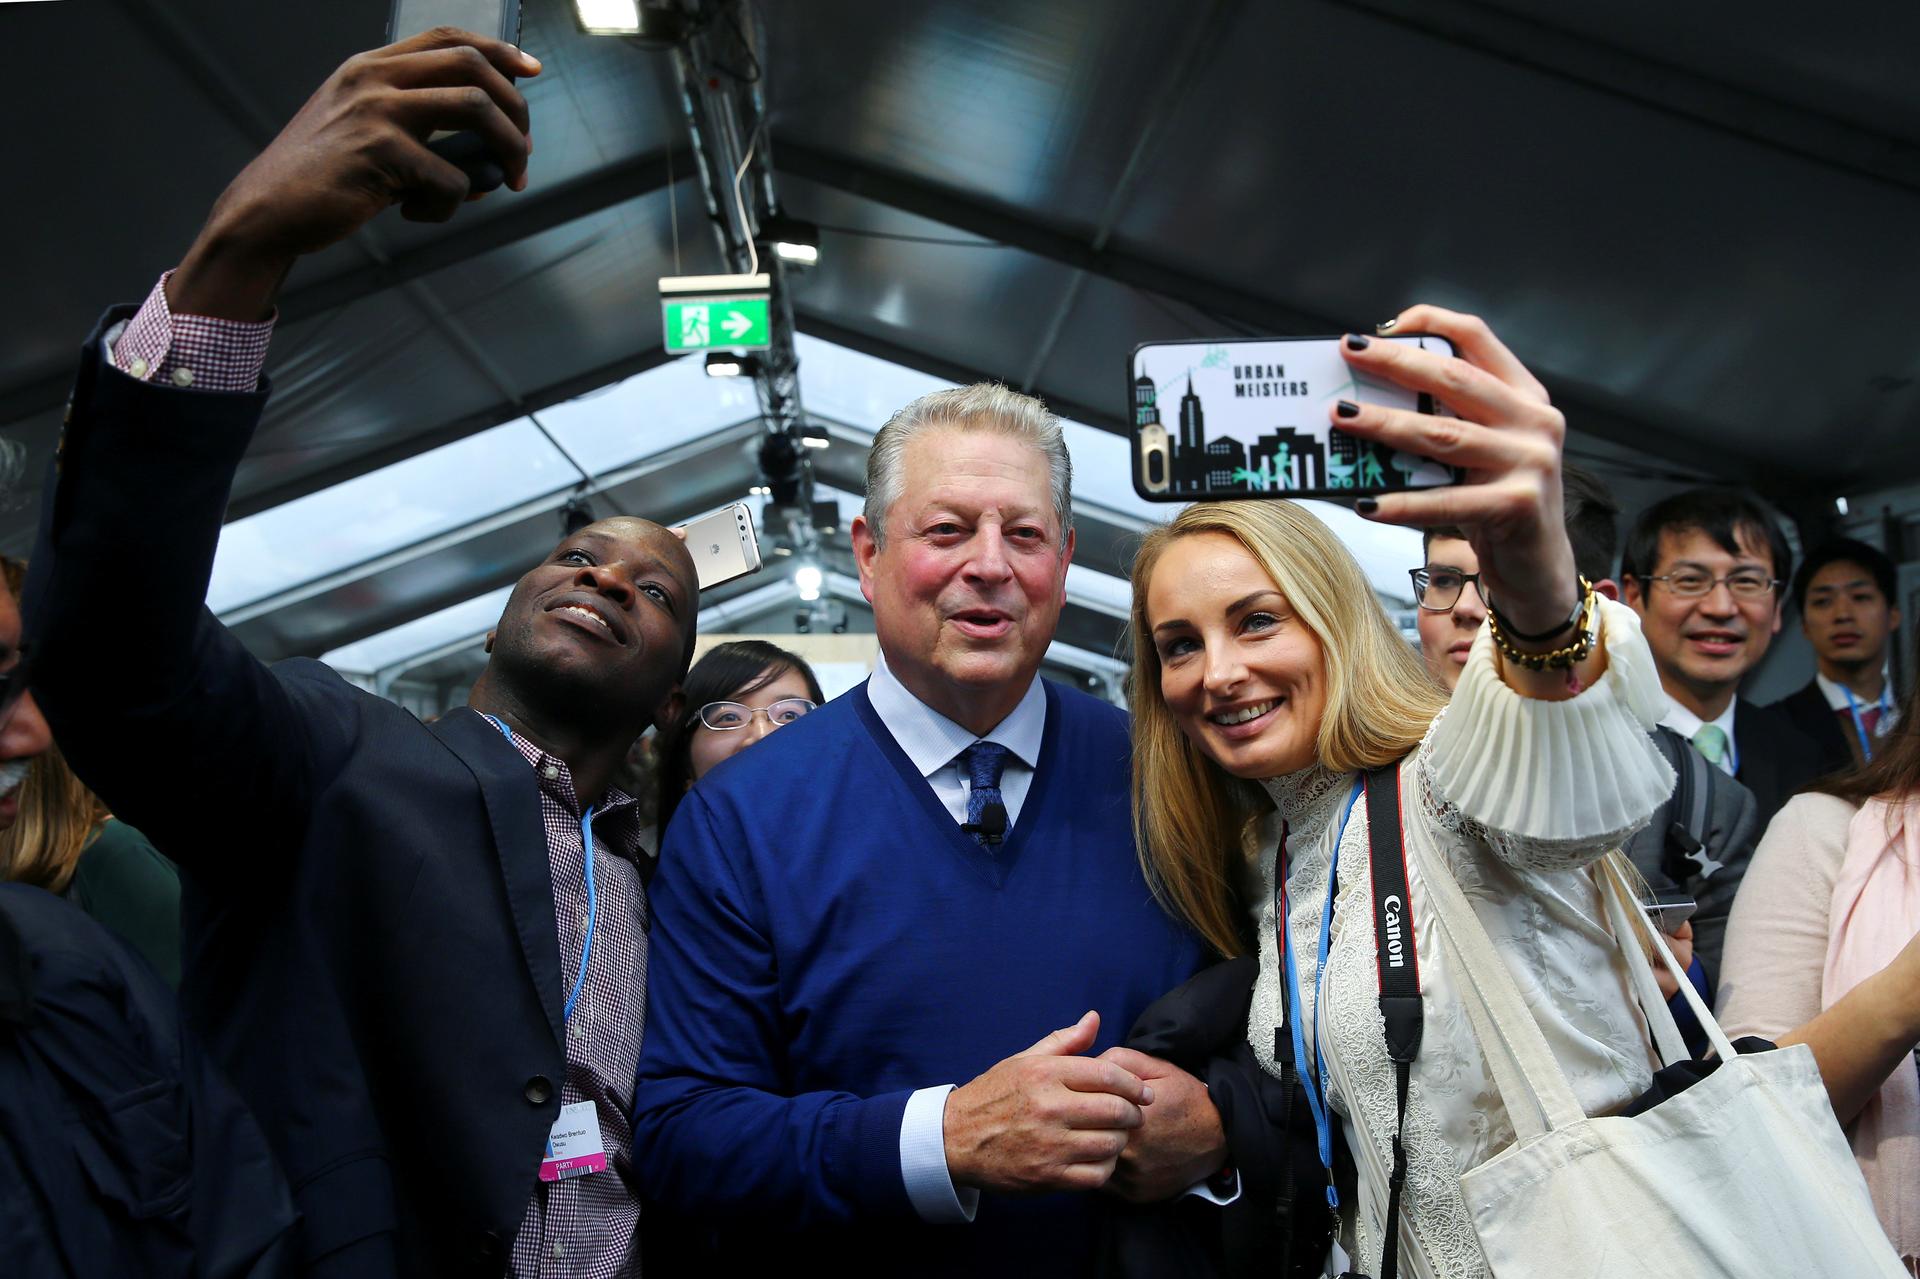 Al Gore poses for selfies with fans